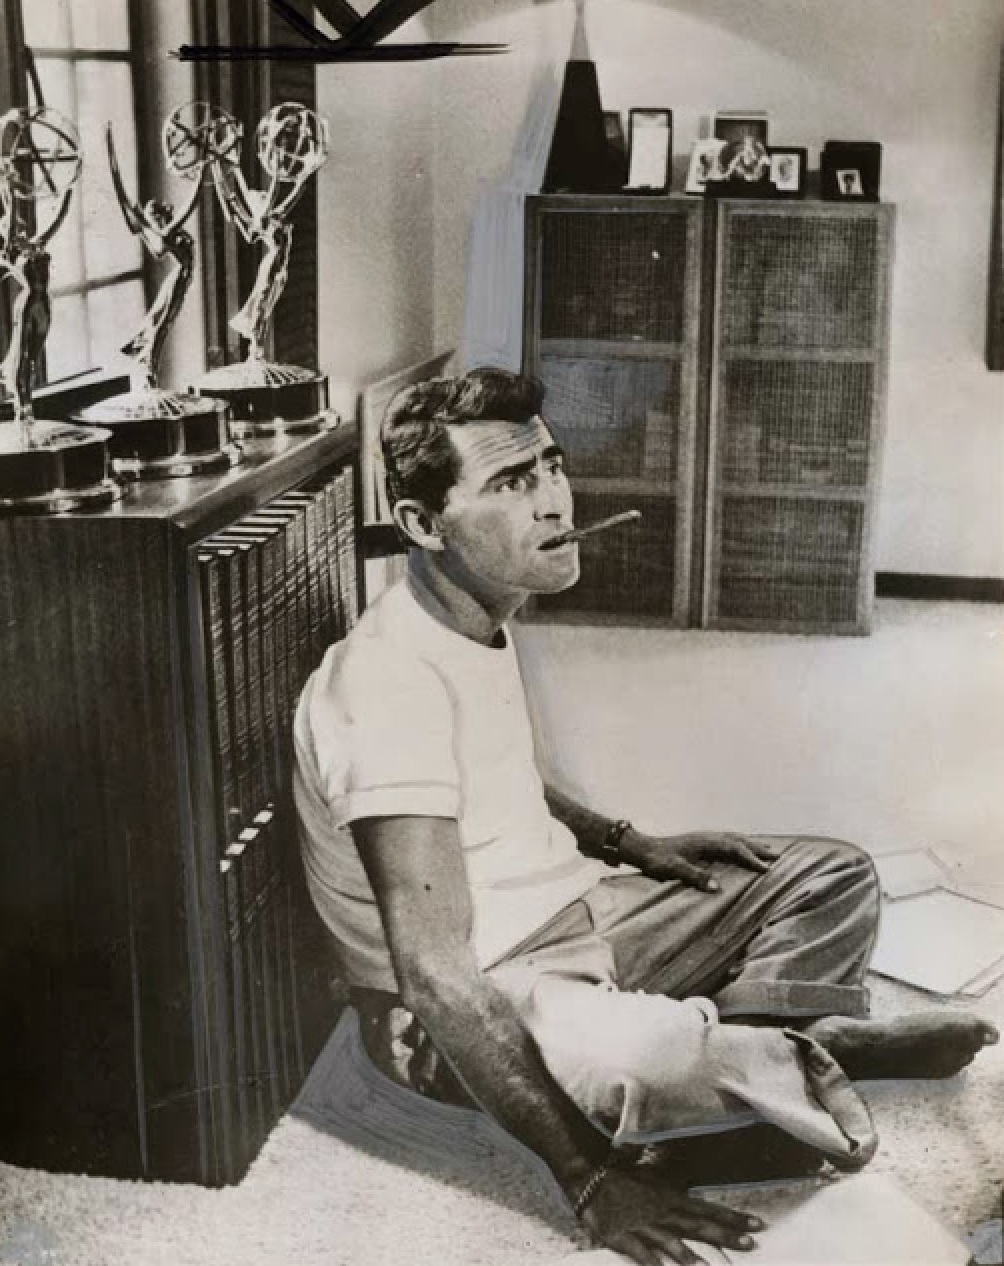 Rod Serling relaxing at home. 1959.